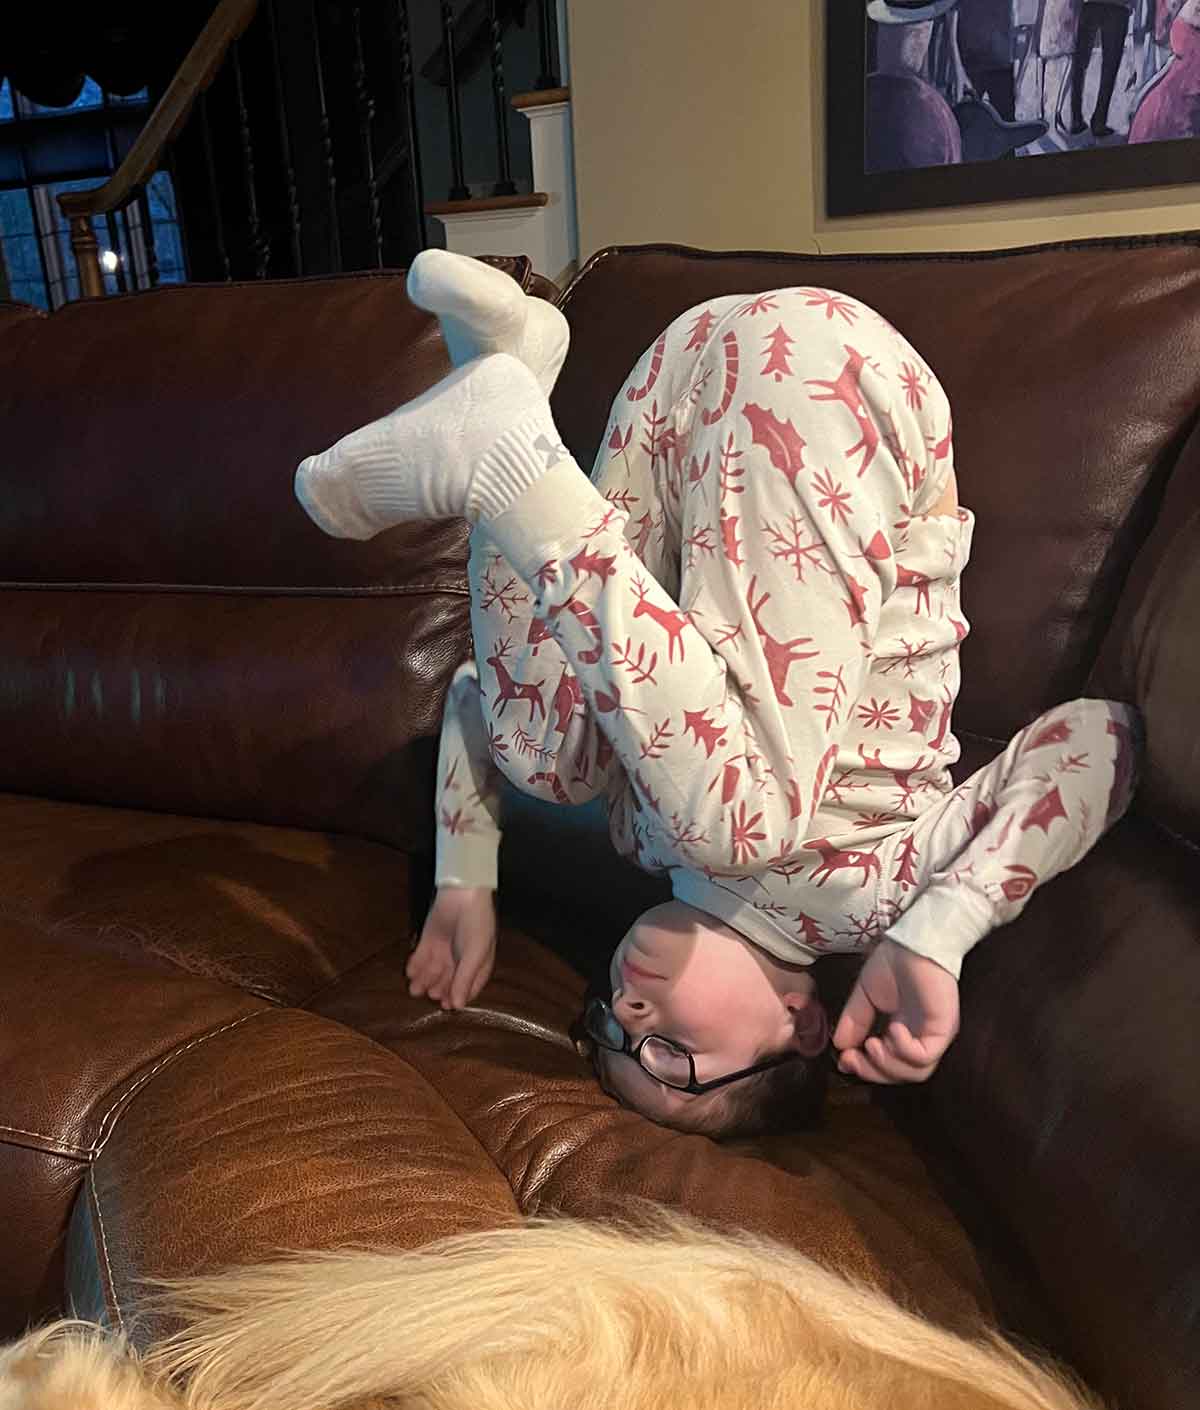 Little boy in Christmas pajamas standing on his head on a couch.